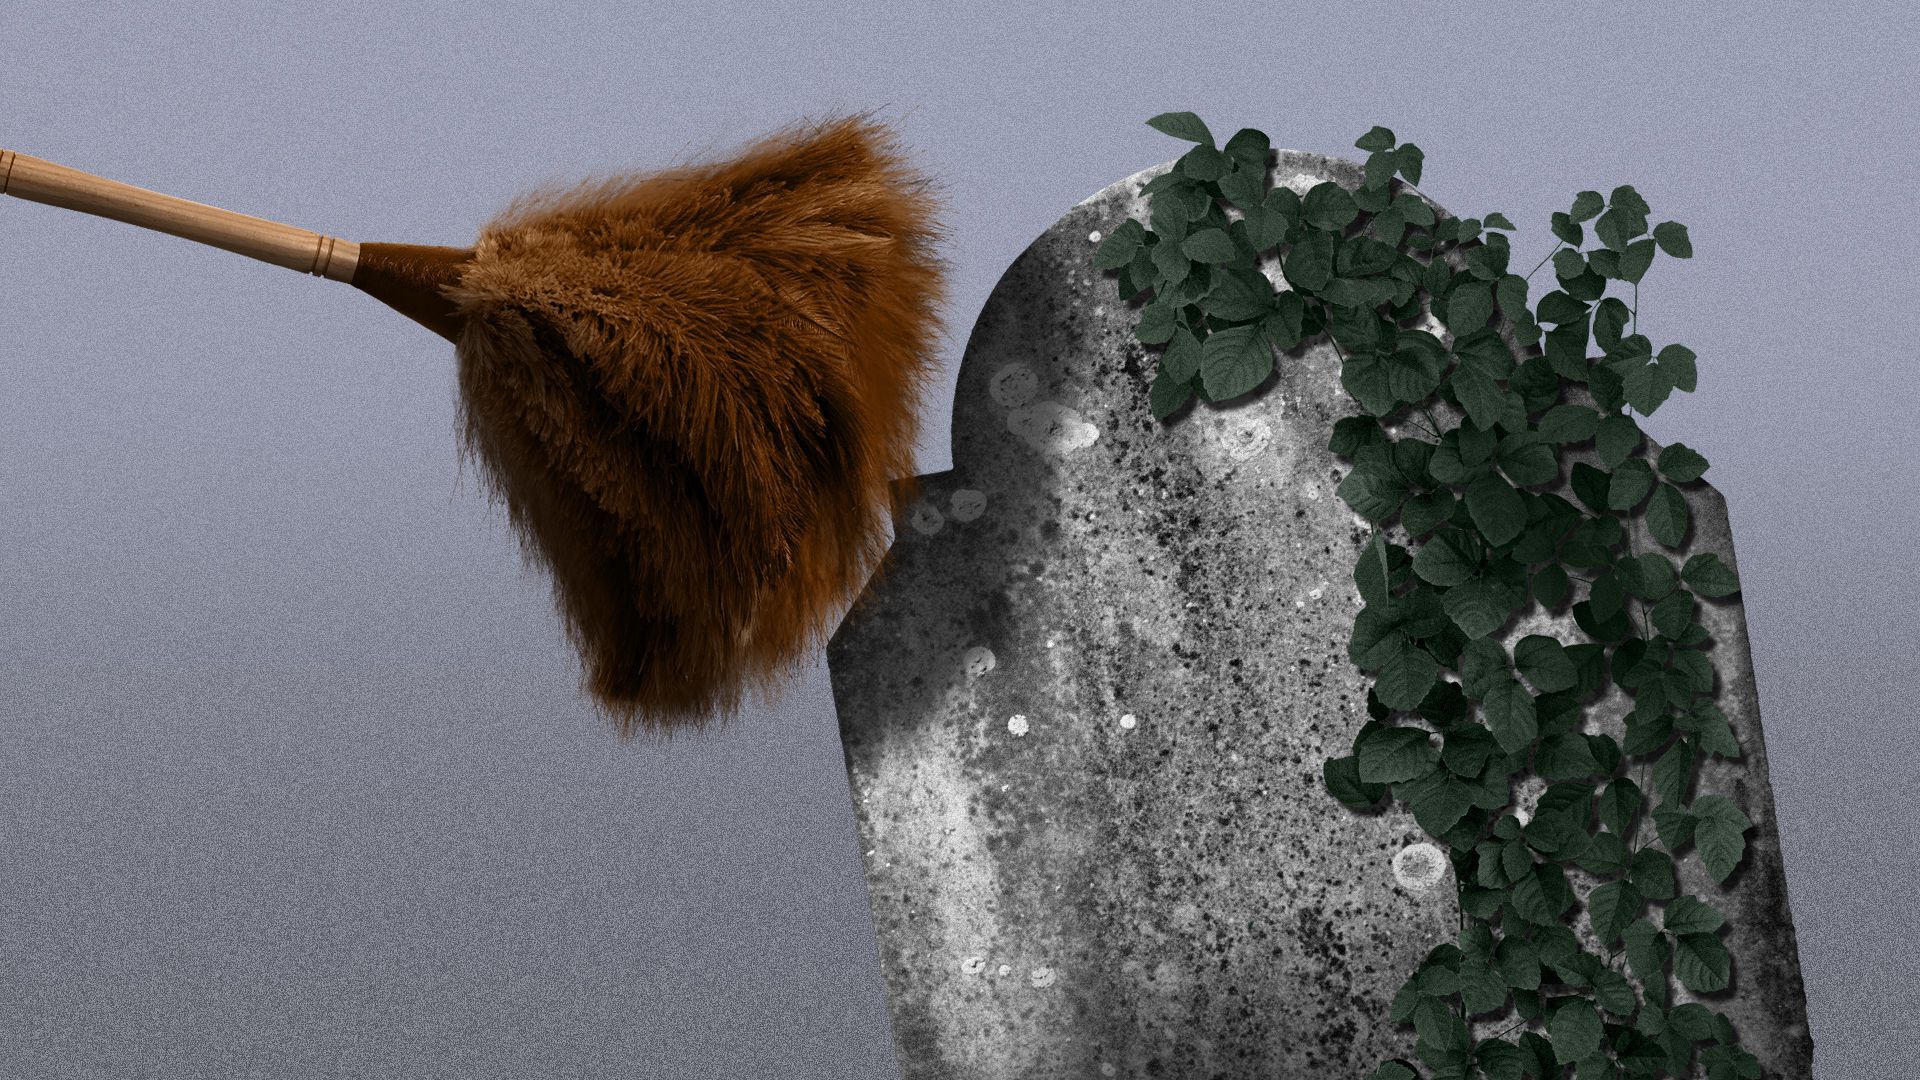 Illustration of a headstone partially covered in ivy being dusted off with a feather duster.